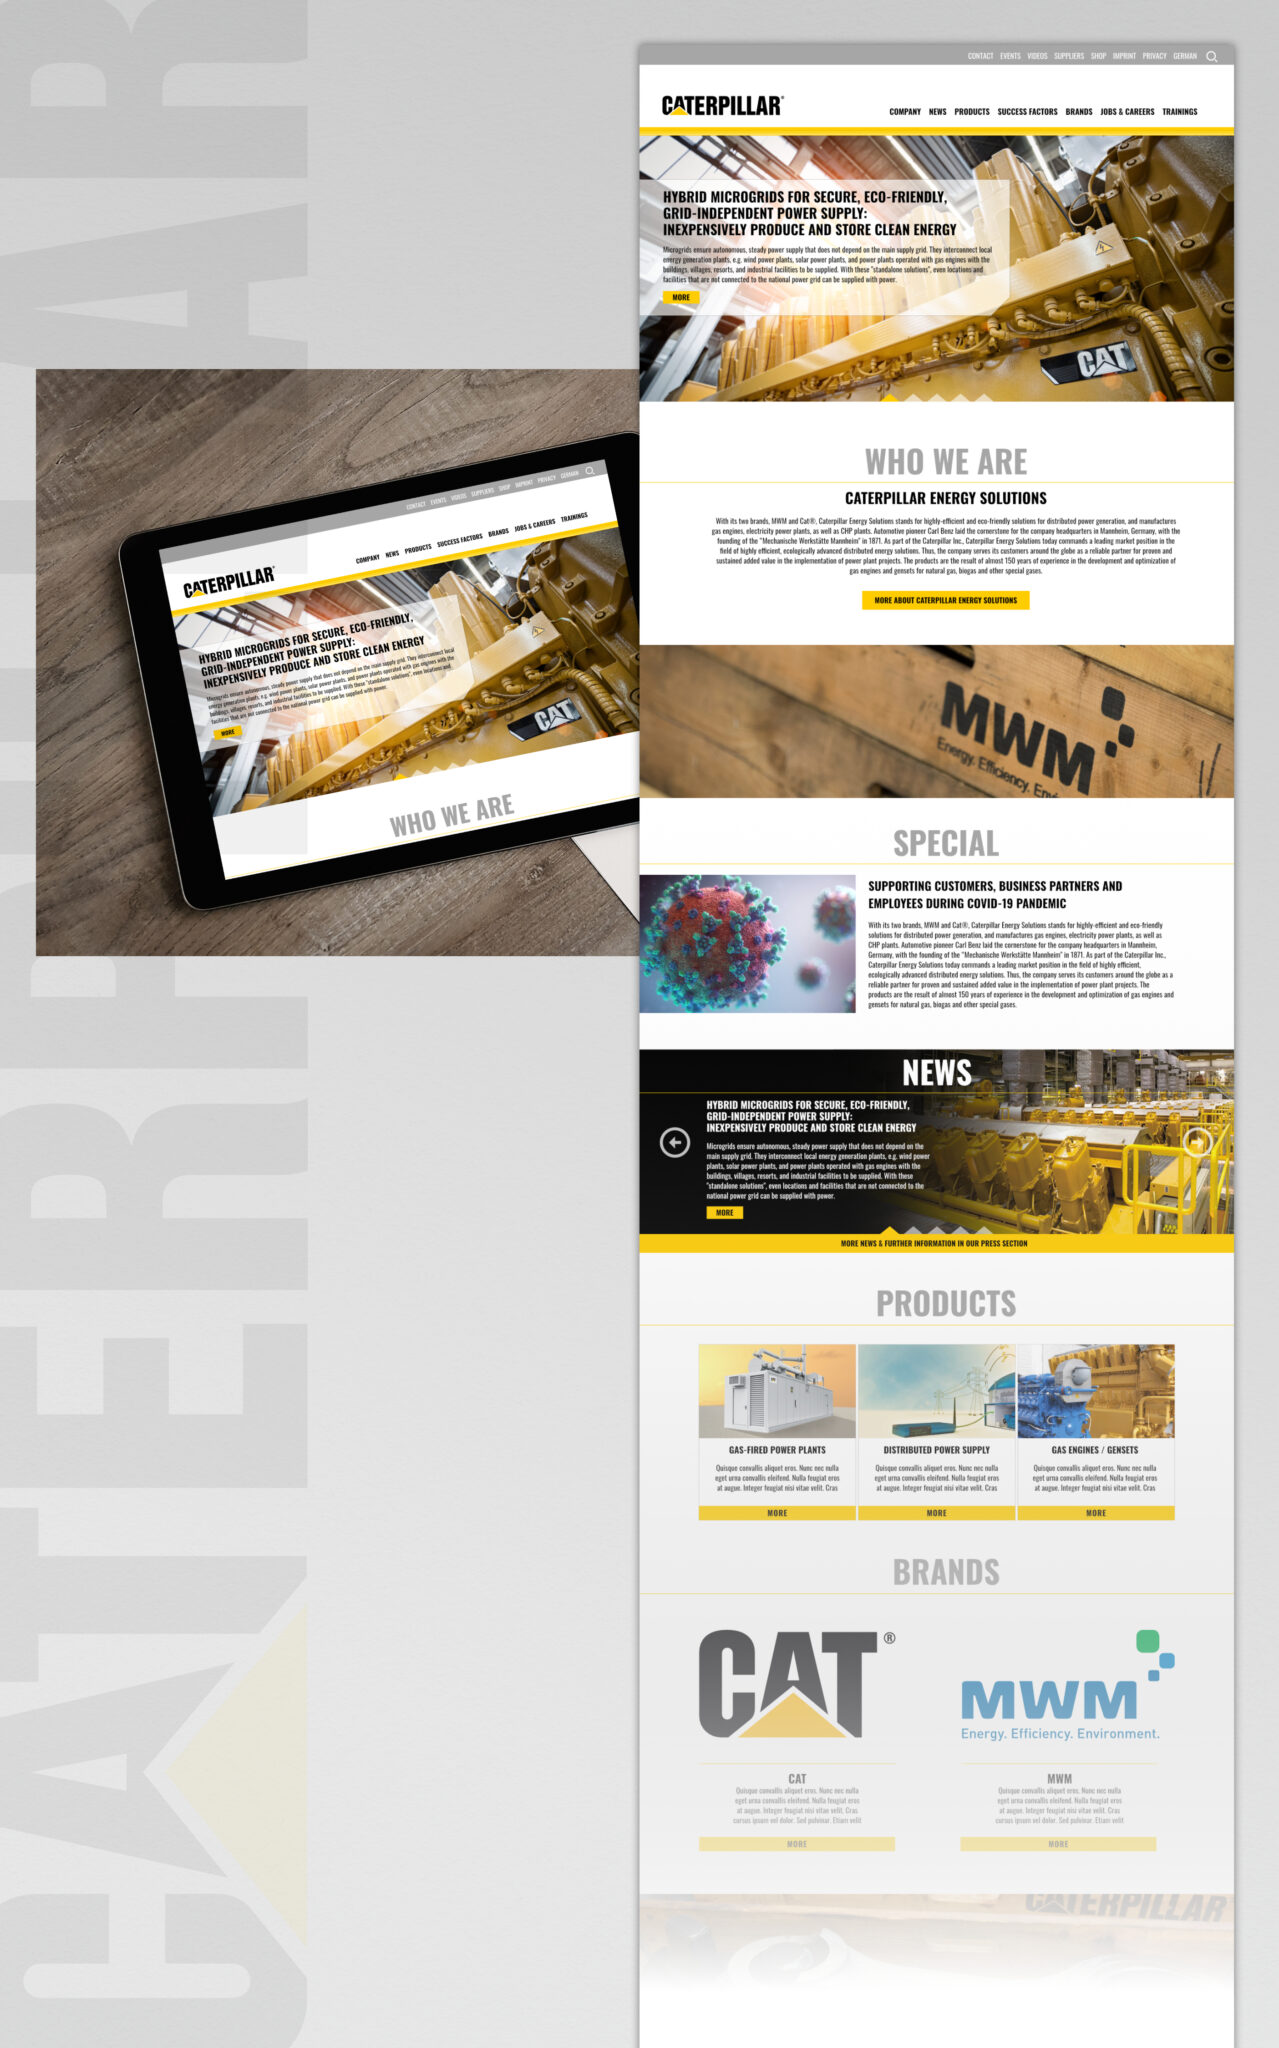 Caterpillar Energy Solutions Website Relaunch: Upgraded Infos Offering in Line with Digitization and Online Strategy